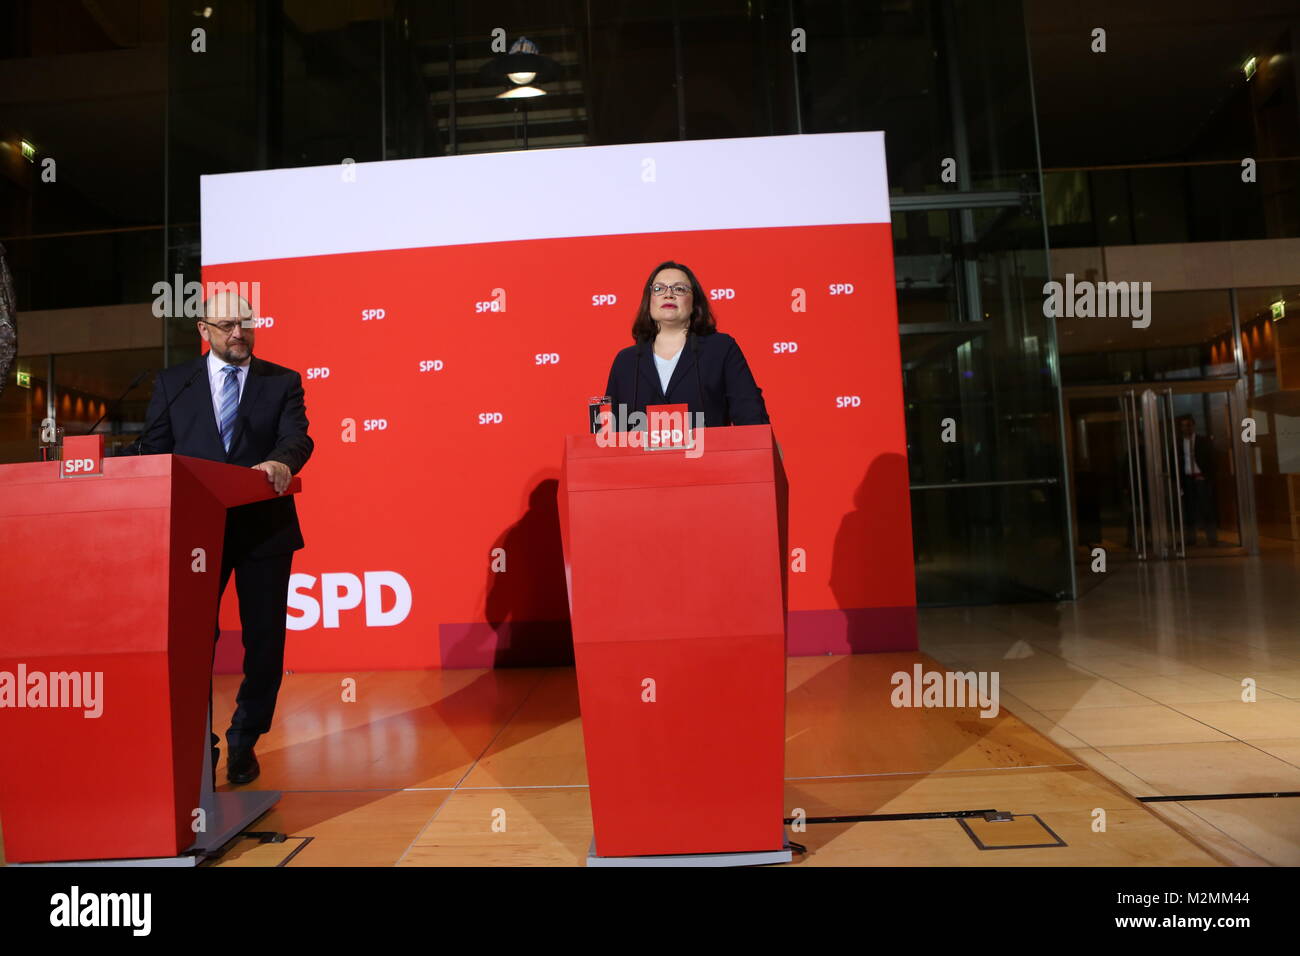 Berlin, Germany. 07th Feb, 2018. SPD leader Martin Schulz hands over the party chairmanship to parliamentary leader Andreas Nahles. Andrea Nahles would be the first woman at the head of the SPD party. Among other things, Martin Schulz explained that he wants to become foreign minister in a new grand coalition and that a process of renewal is necessary within the SPD party. The photo shows Andrea Nahles and Martin Schulz Credit: Simone Kuhlmey/Pacific Press/Alamy Live News Stock Photo